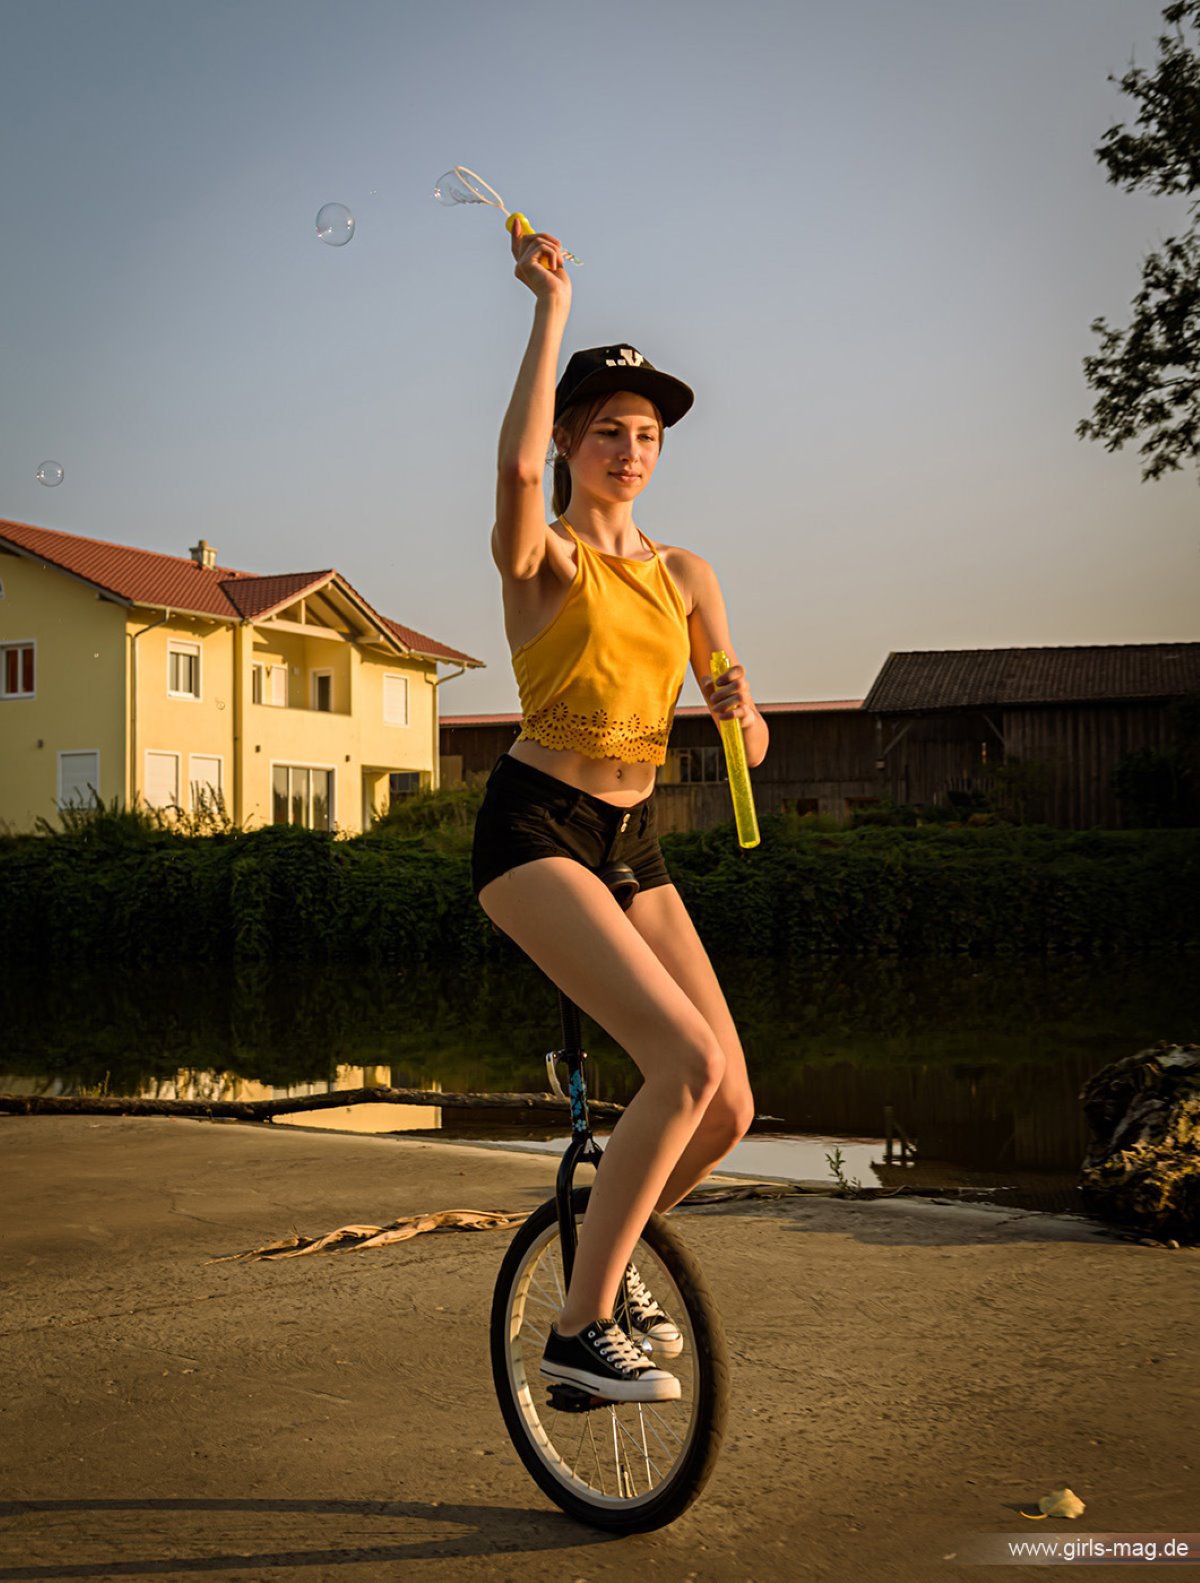 Girls Mag Annika Bubbles on a Unicycle 0113 0677438598.jpg